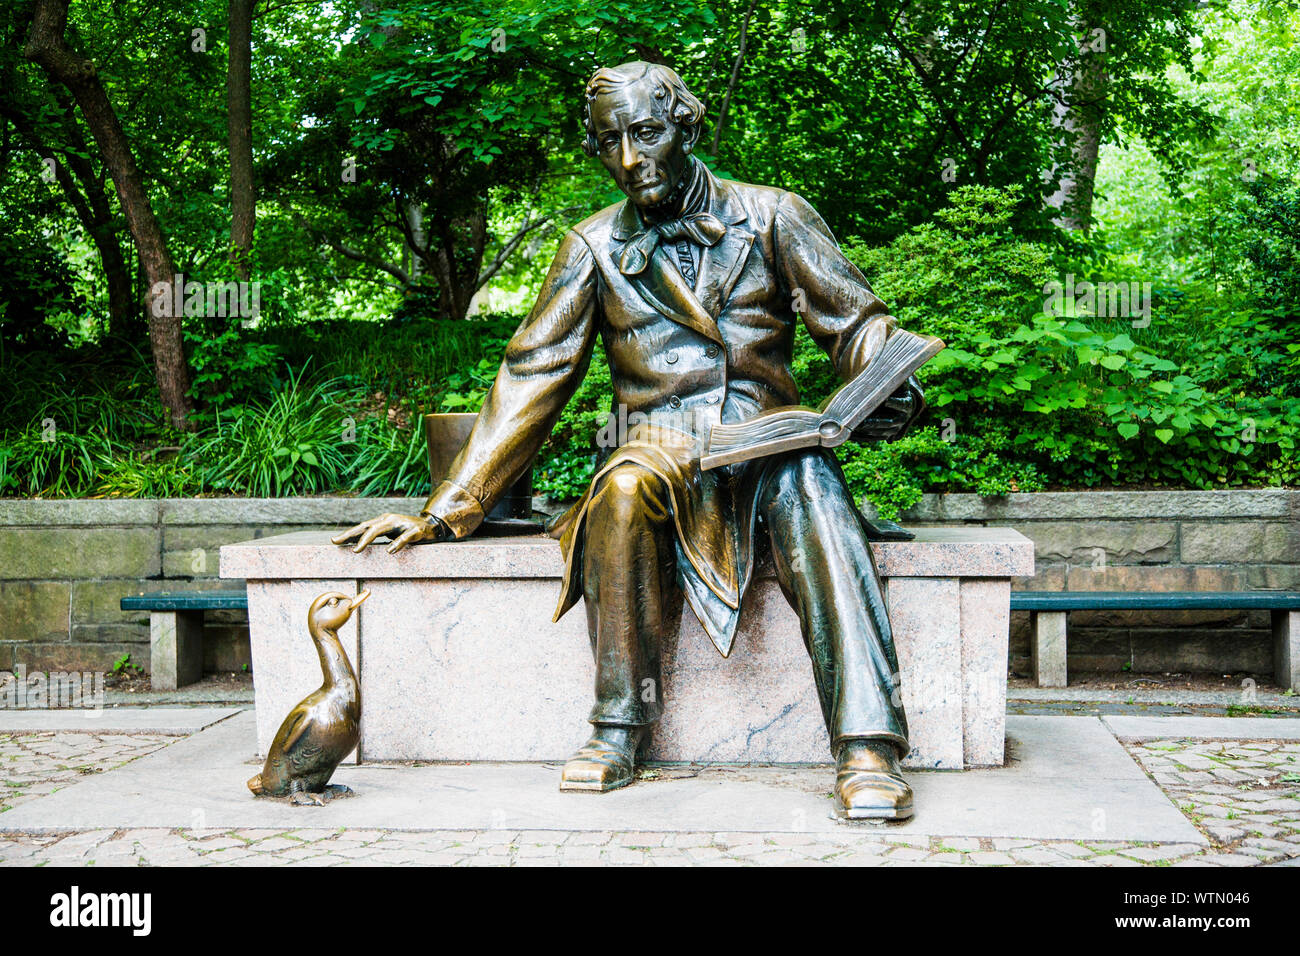 Hans Christian Andersen Statue - All You Need to Know BEFORE You